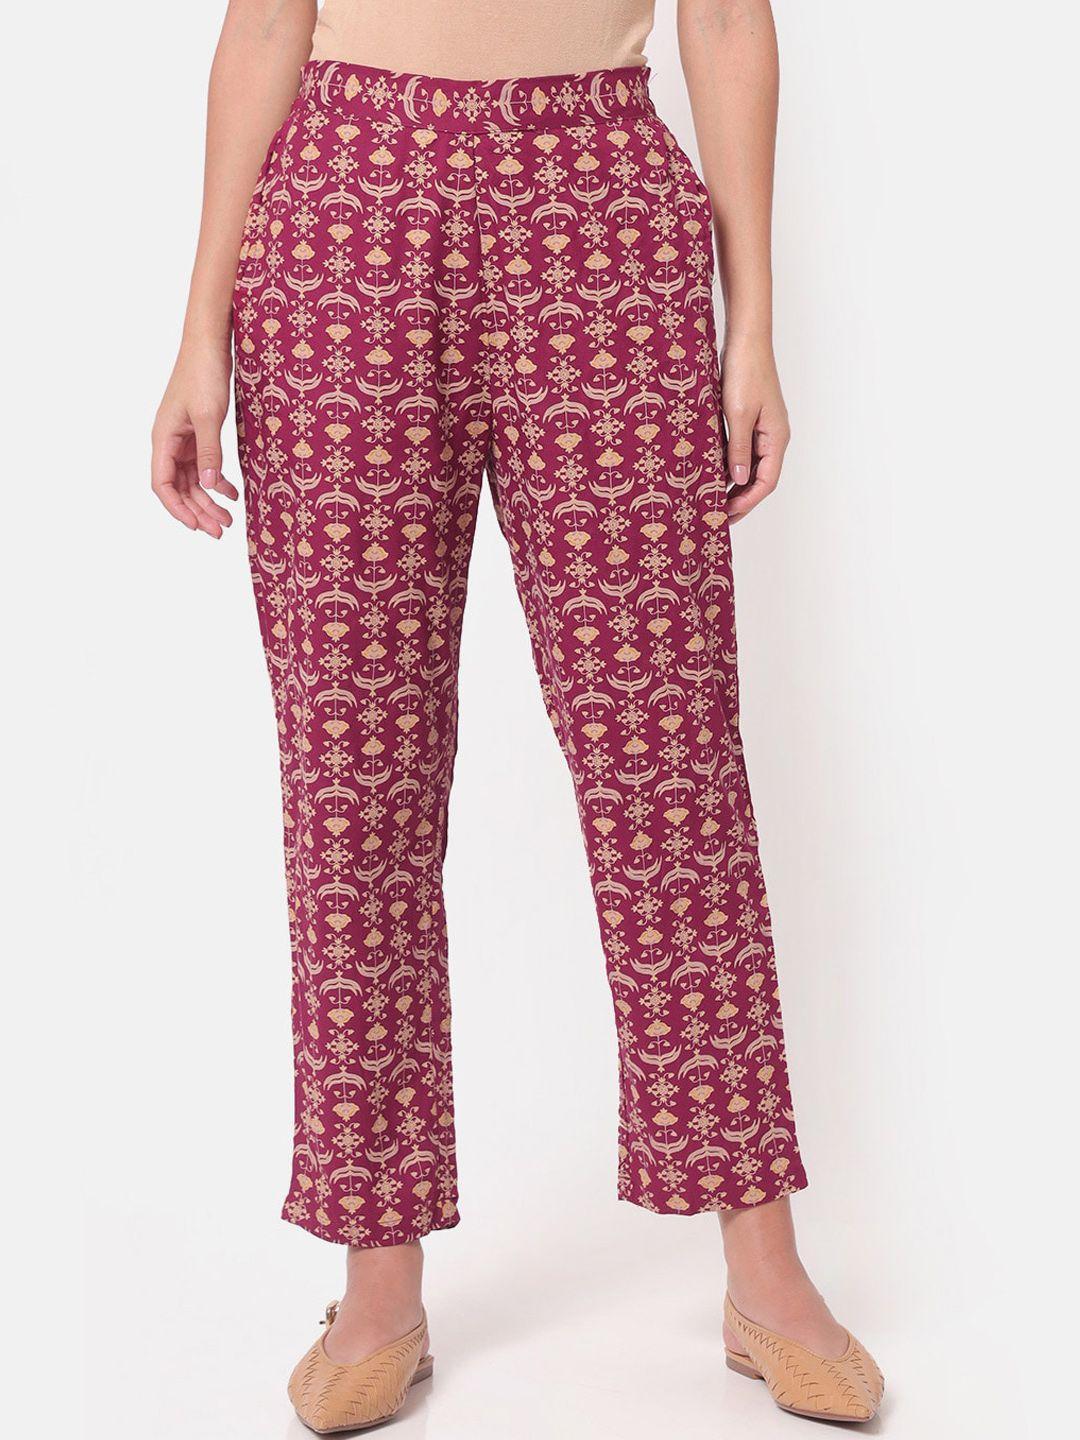 saaki women red floral printed trousers